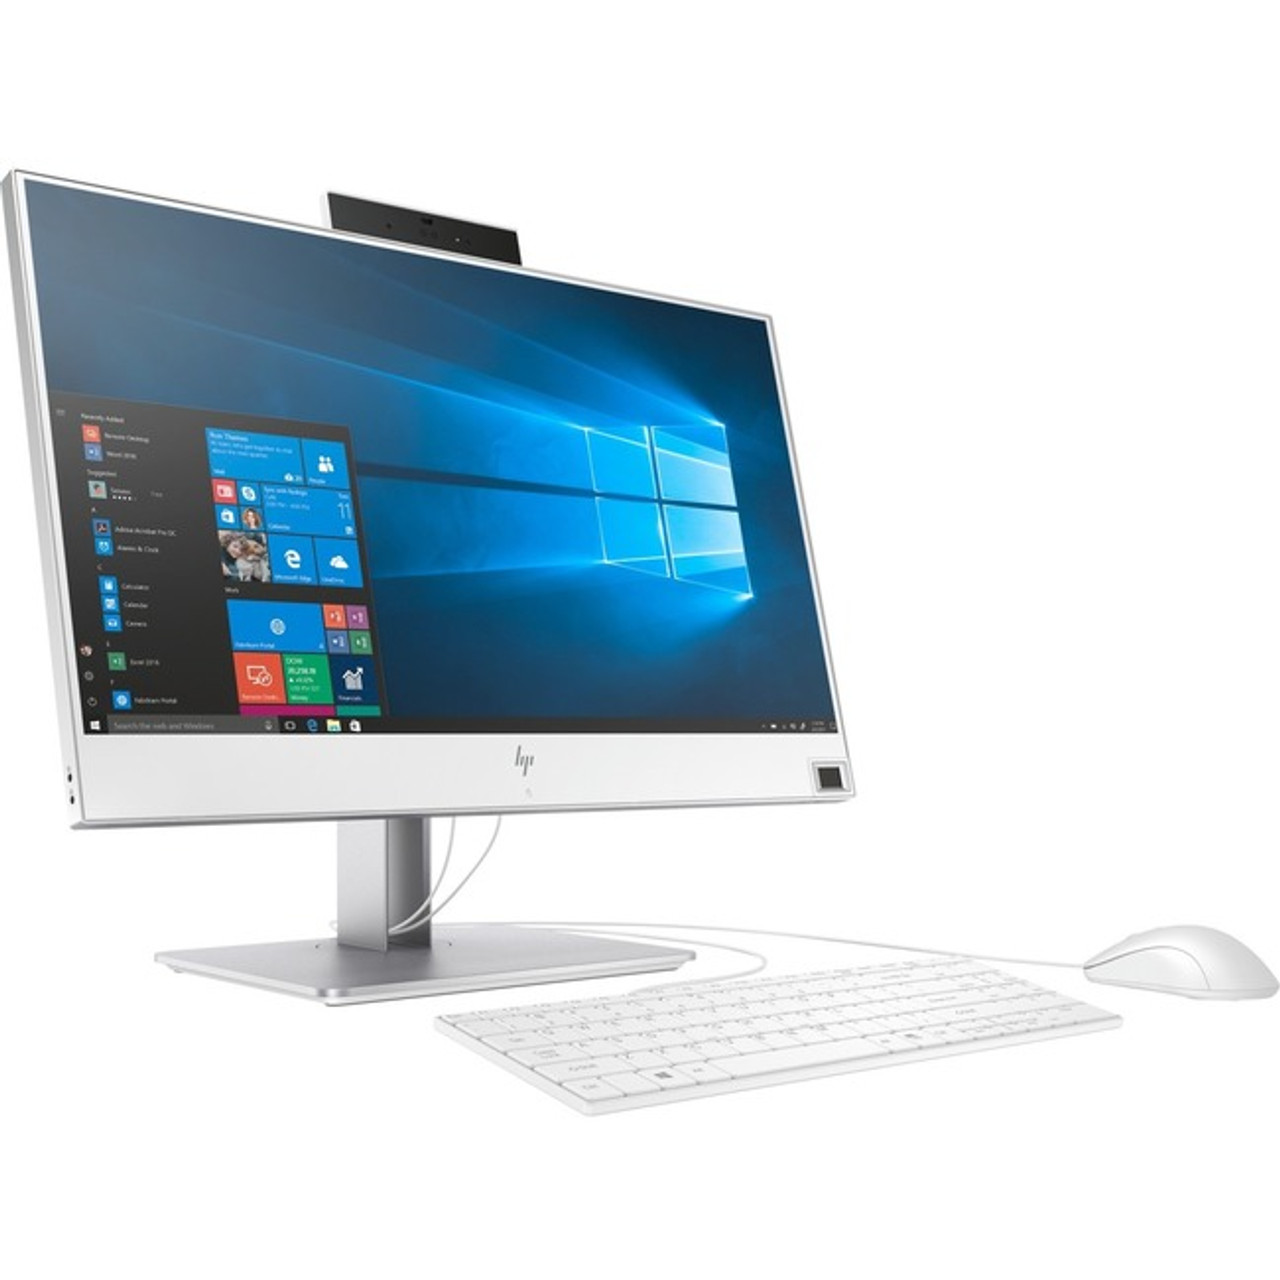 EliteOne 800 G4 23.8-in Healthcare Edition All-in-One Business PC